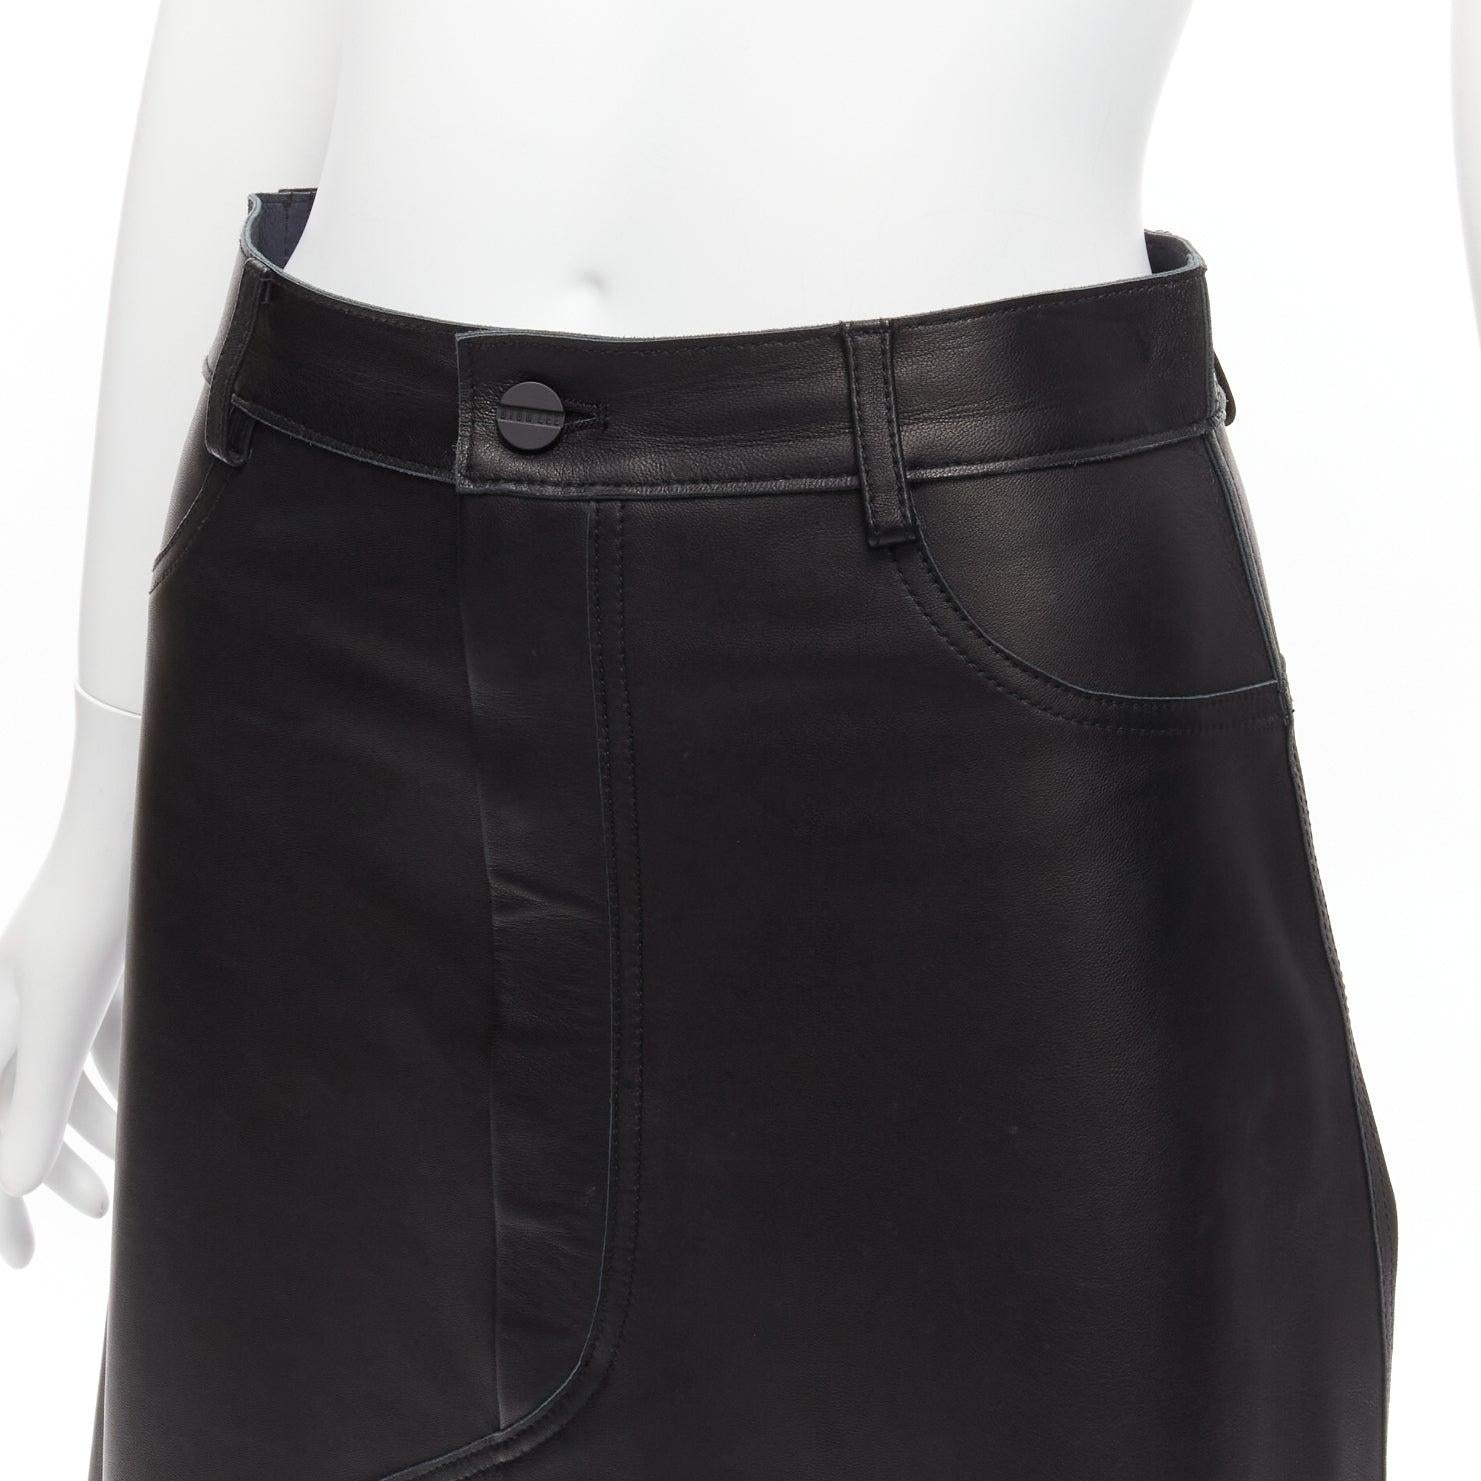 DION LEE black sheep leather back yoke front slit A-line skirt UK6 XS
Reference: SNKO/A00318
Brand: Dion Lee
Material: Leather
Color: Black
Pattern: Solid
Closure: Zip Fly
Extra Details: Back yoke.
Made in: China

CONDITION:
Condition: Fair, this